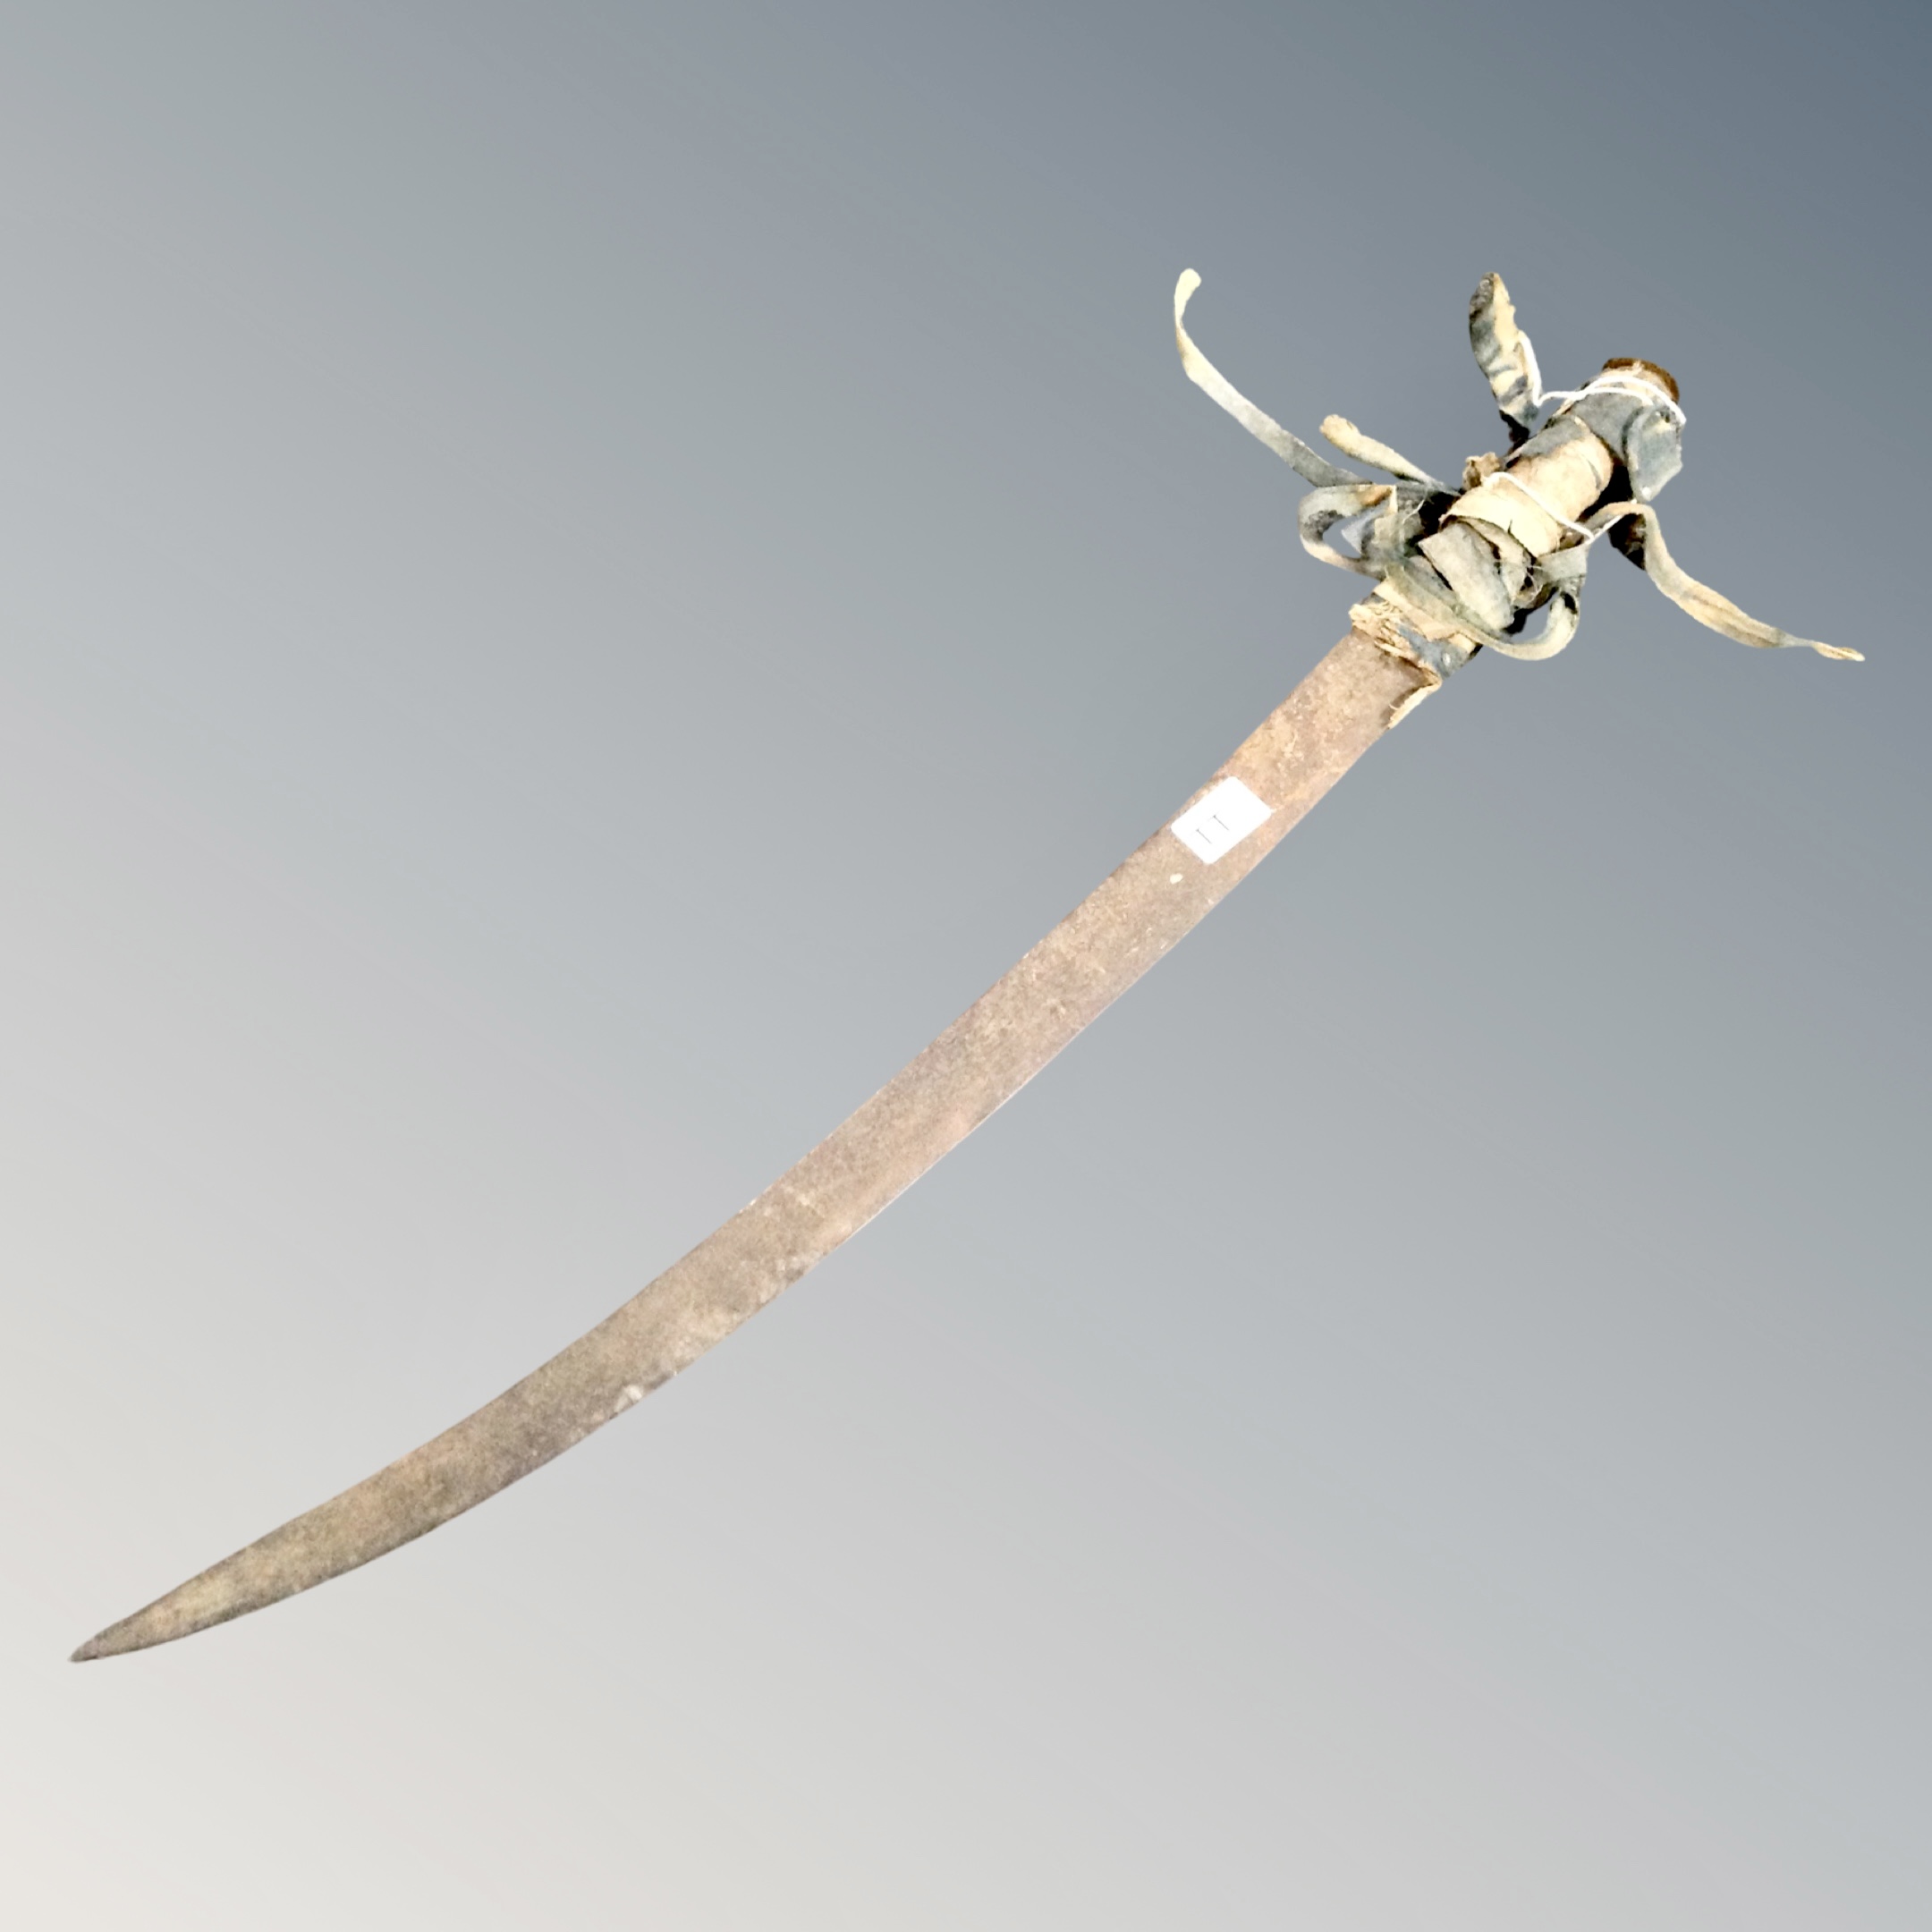 An antique curved sword.